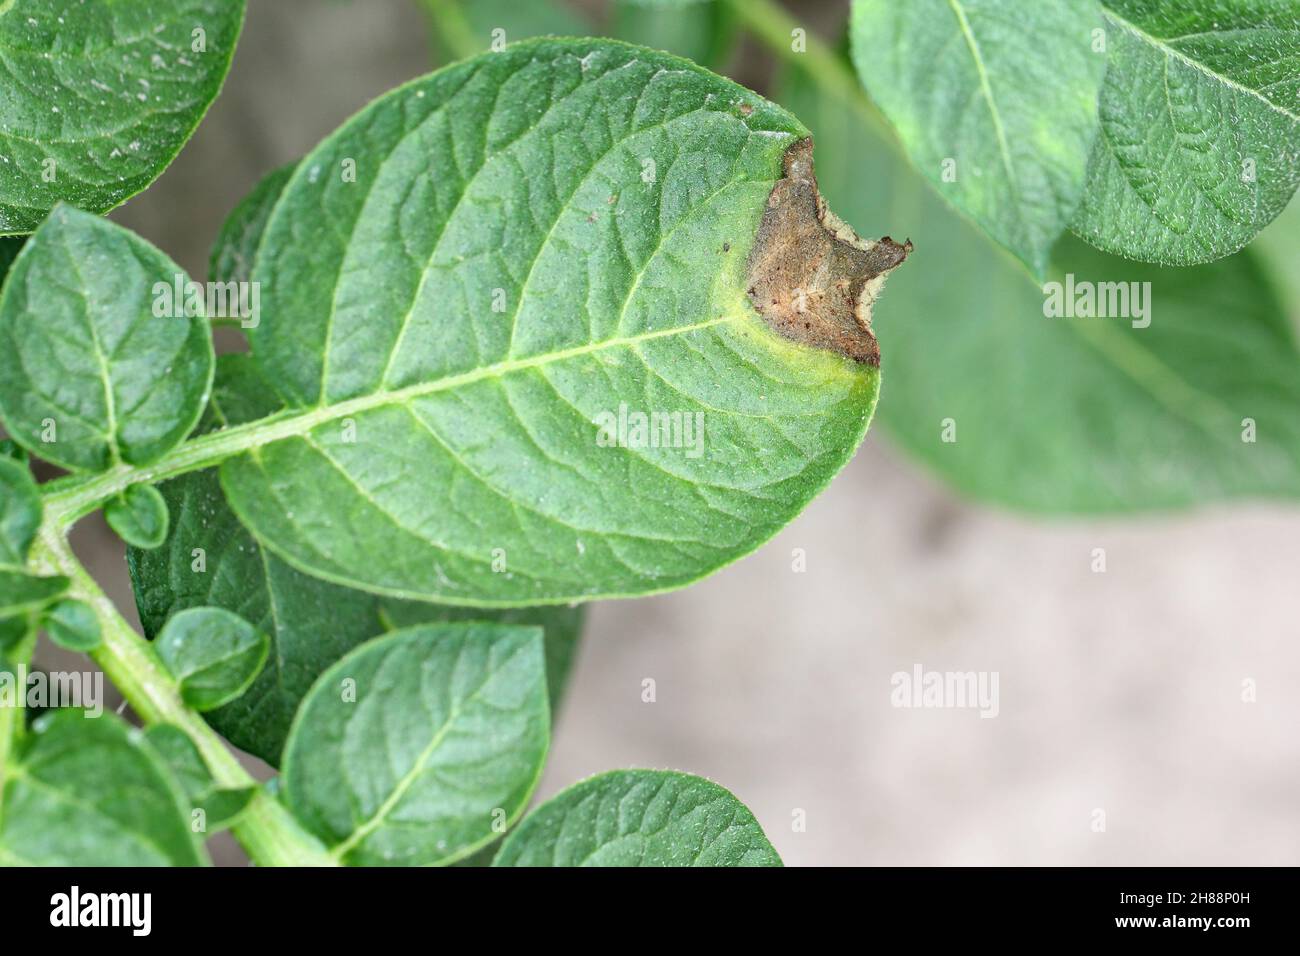 Leaves of potato plant Stricken Phytophthora (Phytophthora Infestans). Close Up. Stock Photo